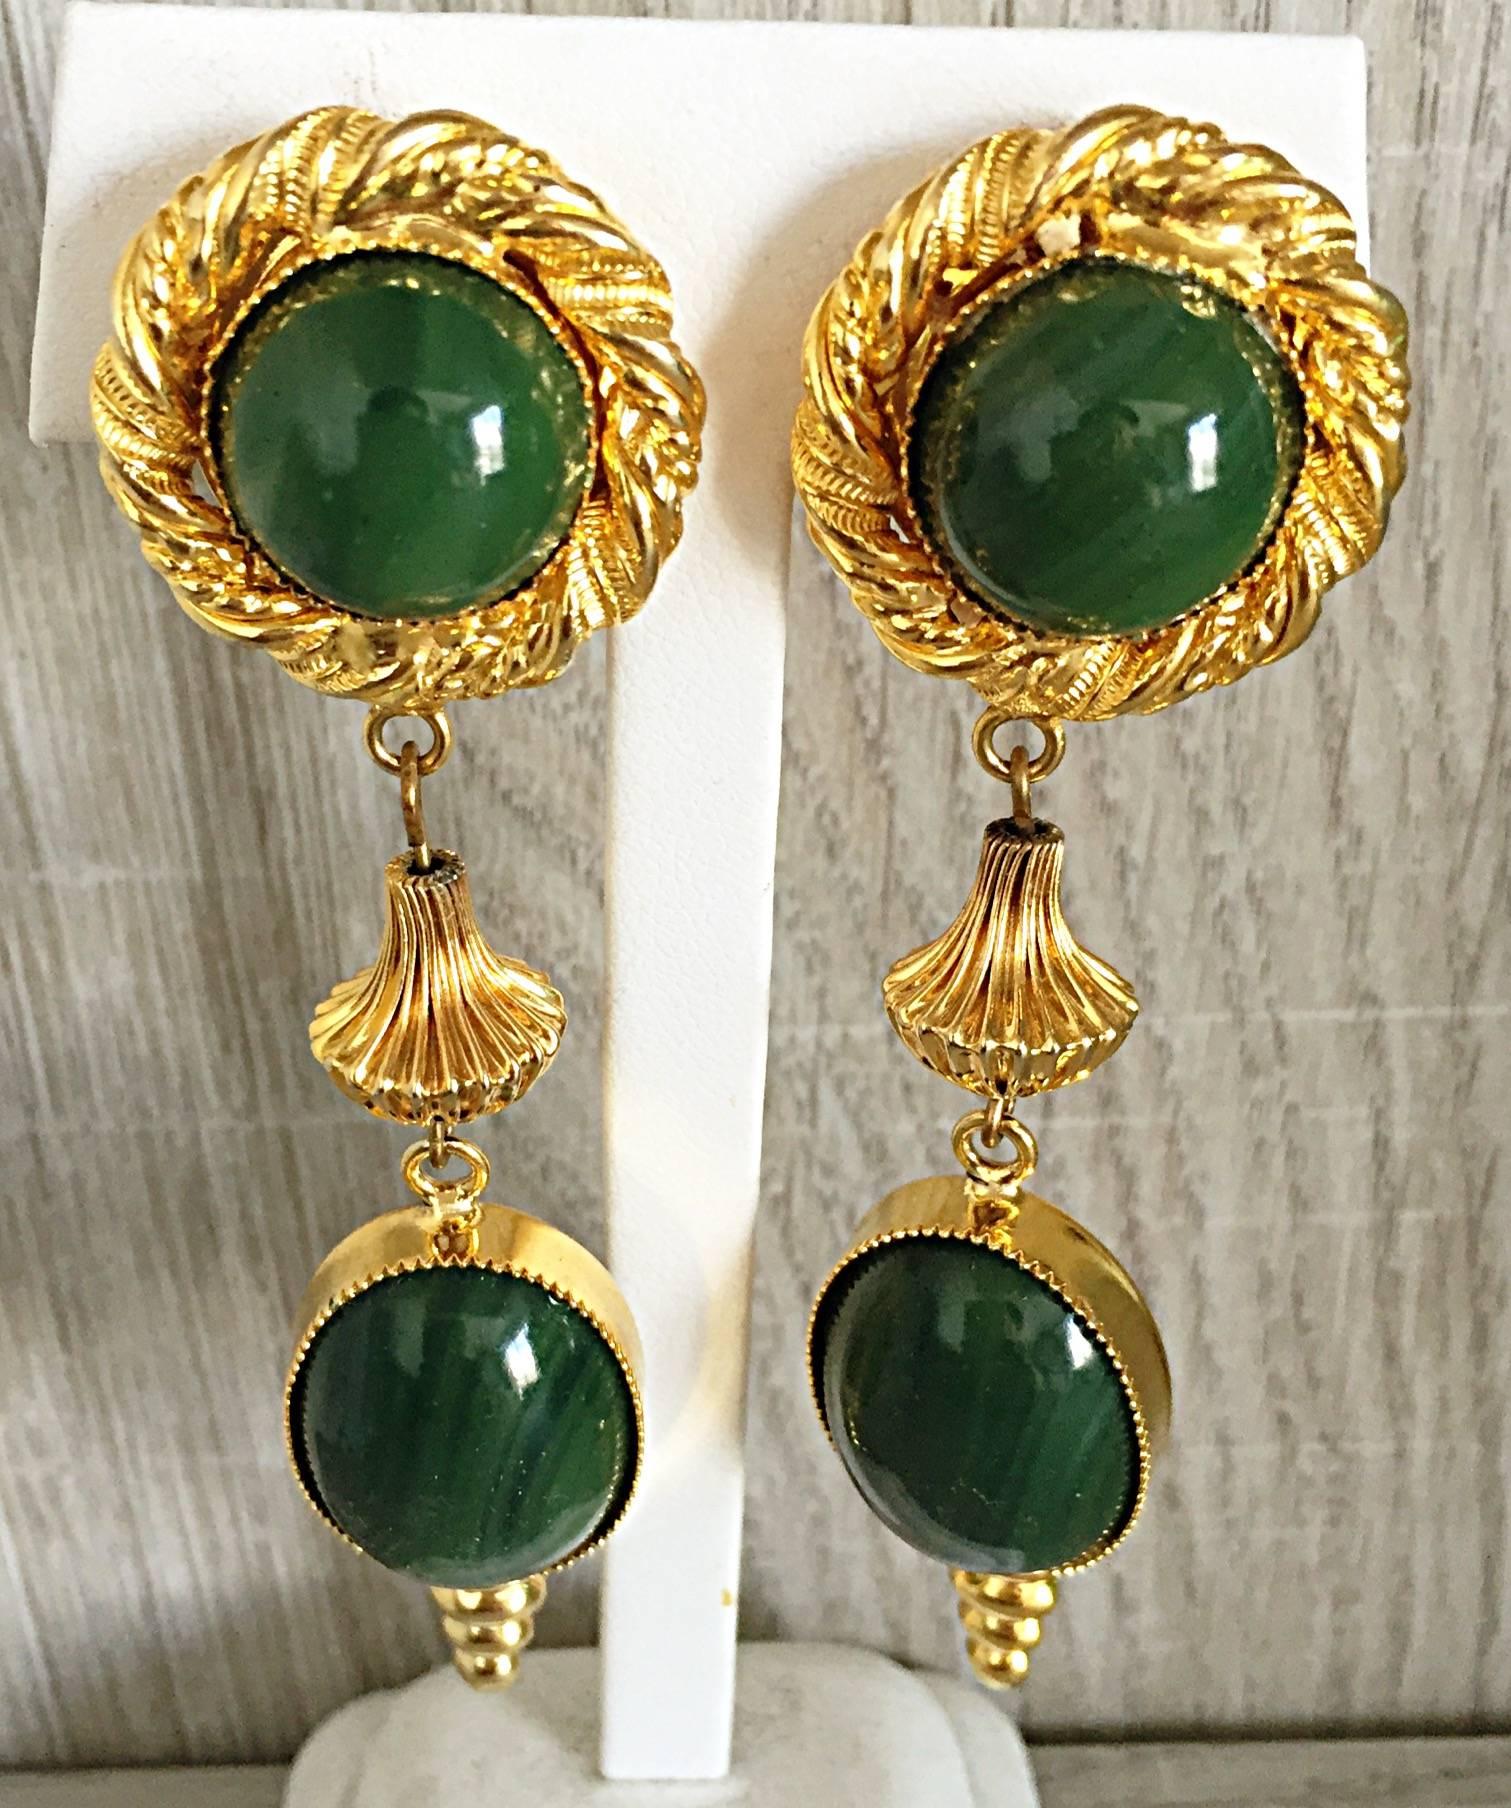 1970s William de Lillo Emerald Green + Gold Vintage Clip On Earrings Signed 4